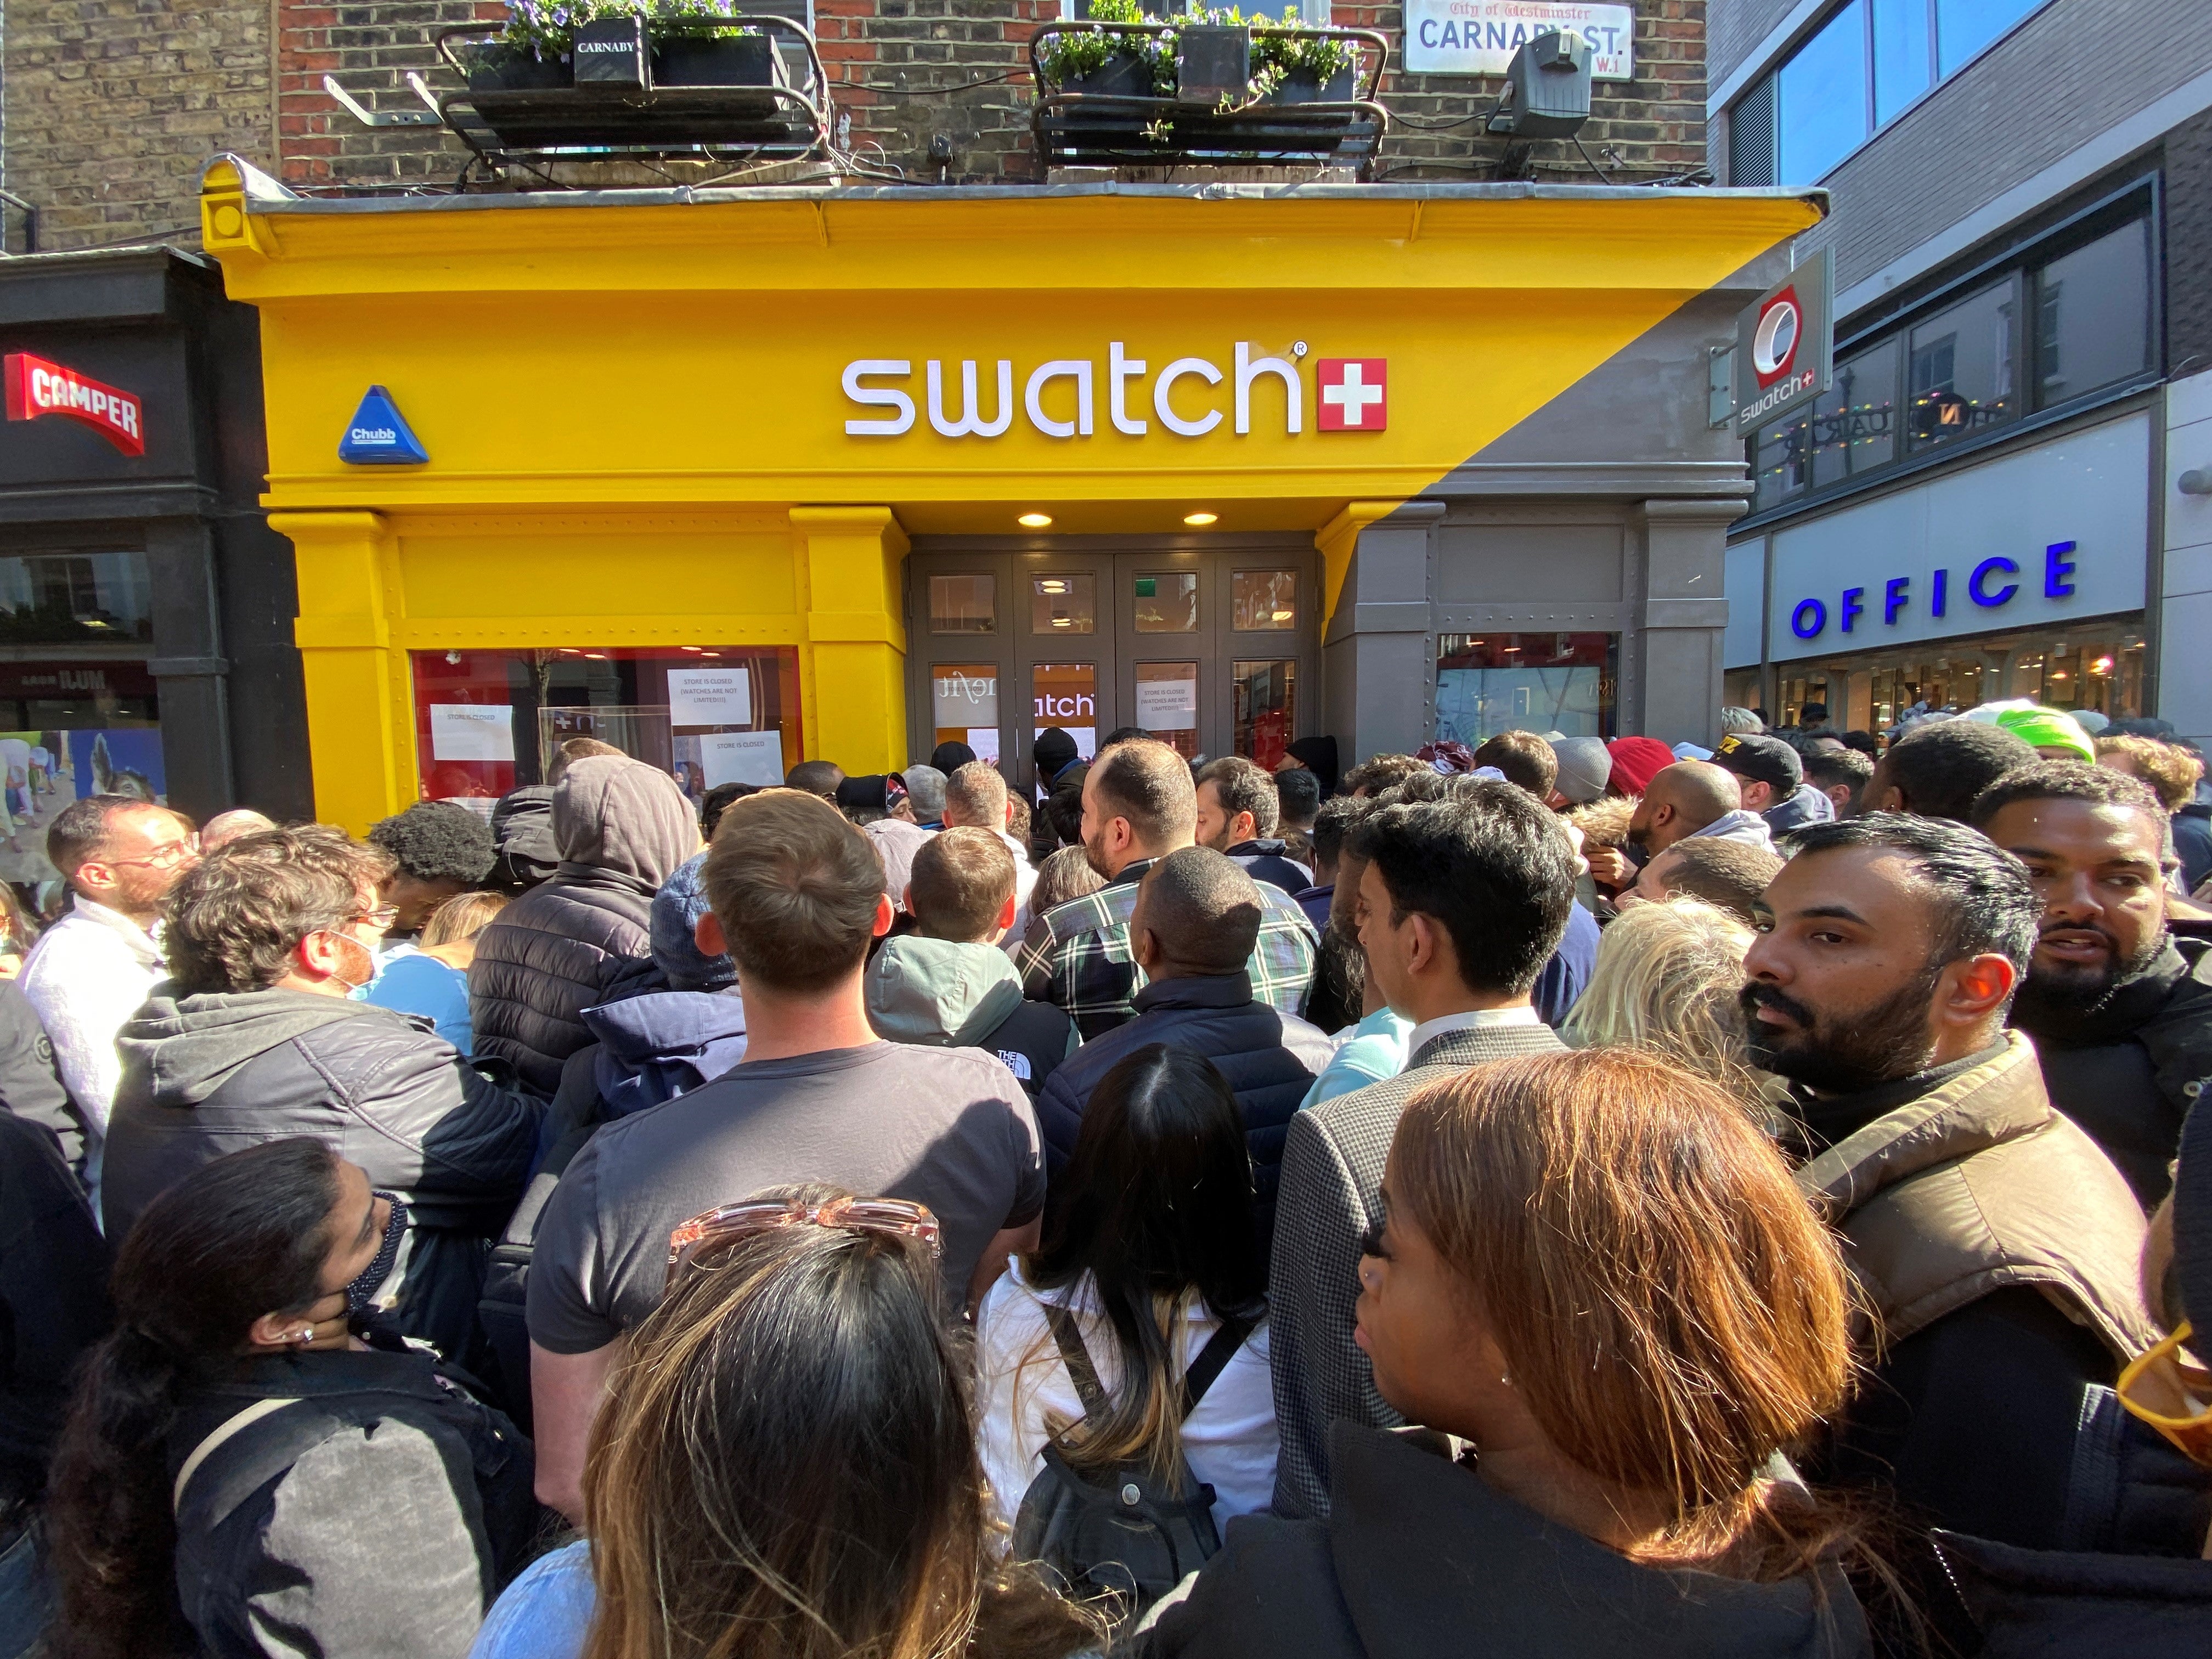 Customers crowded outside the Swatch store on Carnaby Street, central London, for the launch of the MoonSwatch collection (Yui Mok/PA)